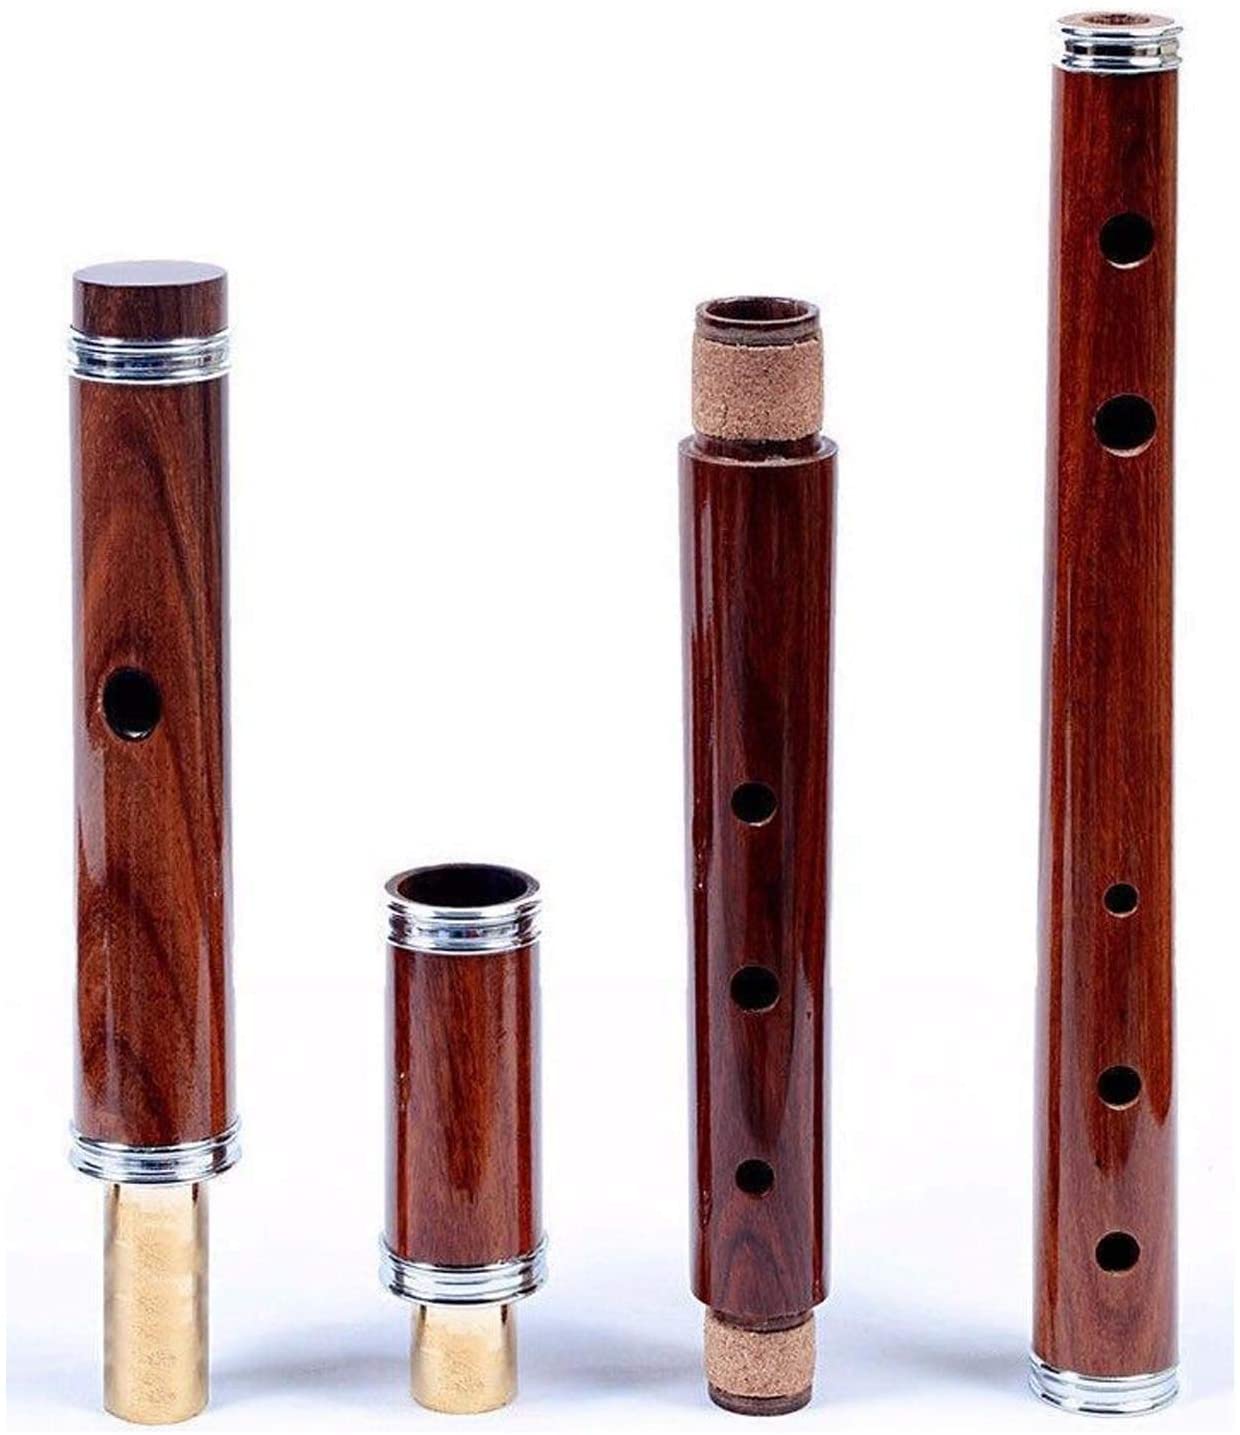  Traditional Irish Wooden"D" Flute with Hard Wood Case - Rosewood 3-Part 23"